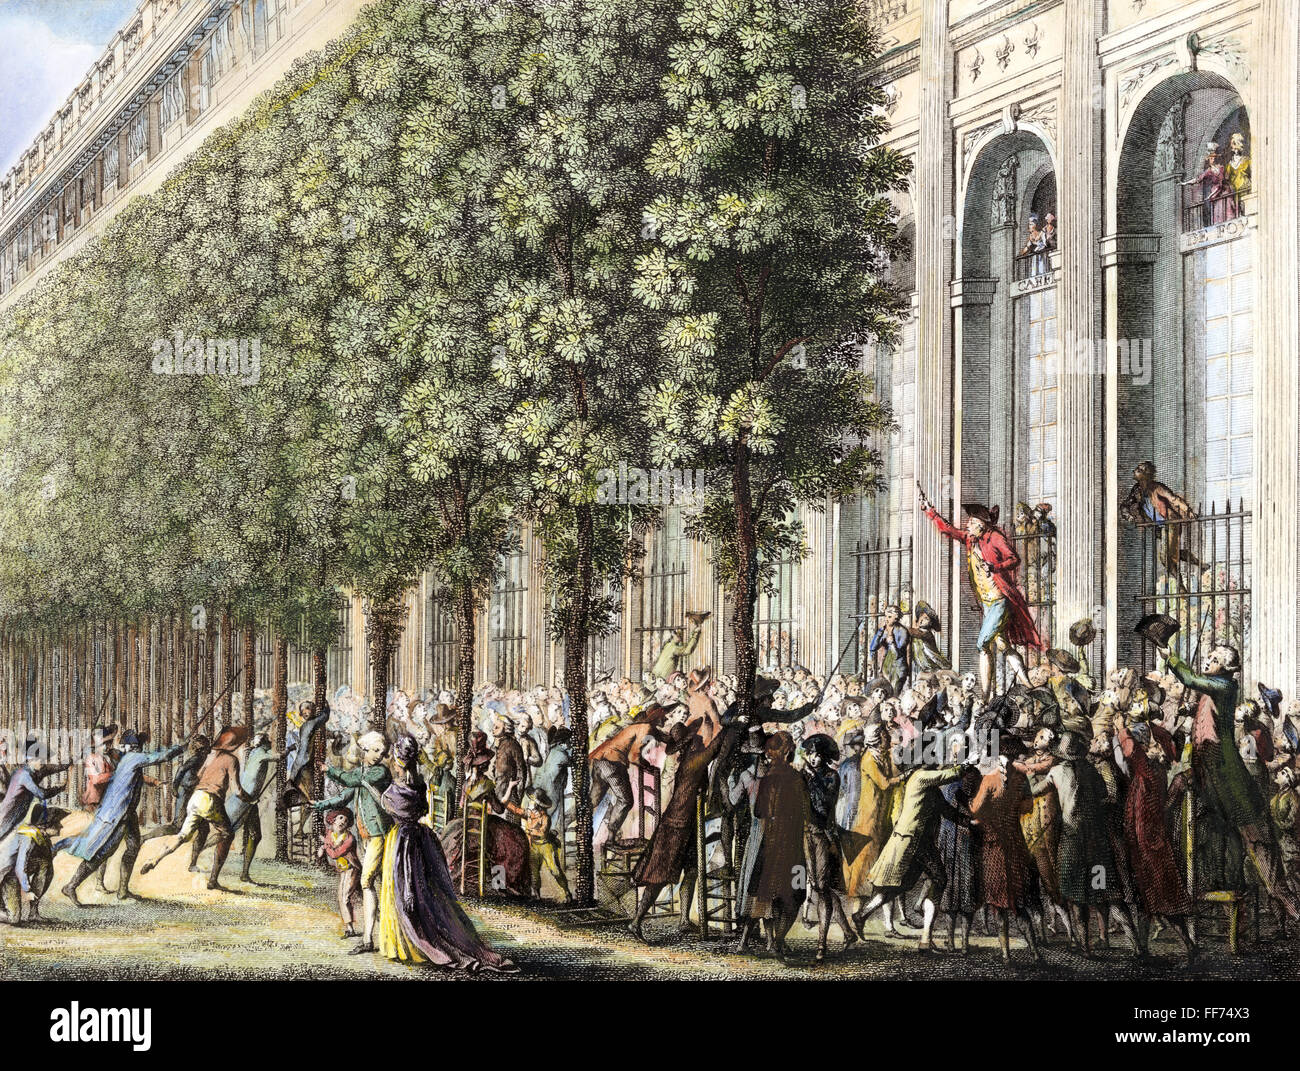 FRENCH REVOLUTION, 1789. /nCamille Desmoulins haranguing Parisians at the Palais Royal on 12 July 1789, two days before the taking of the Bastille and the actual beginning of the French Revolution. French line engraving by Jean-Louis Prieur, early 19th ce Stock Photo